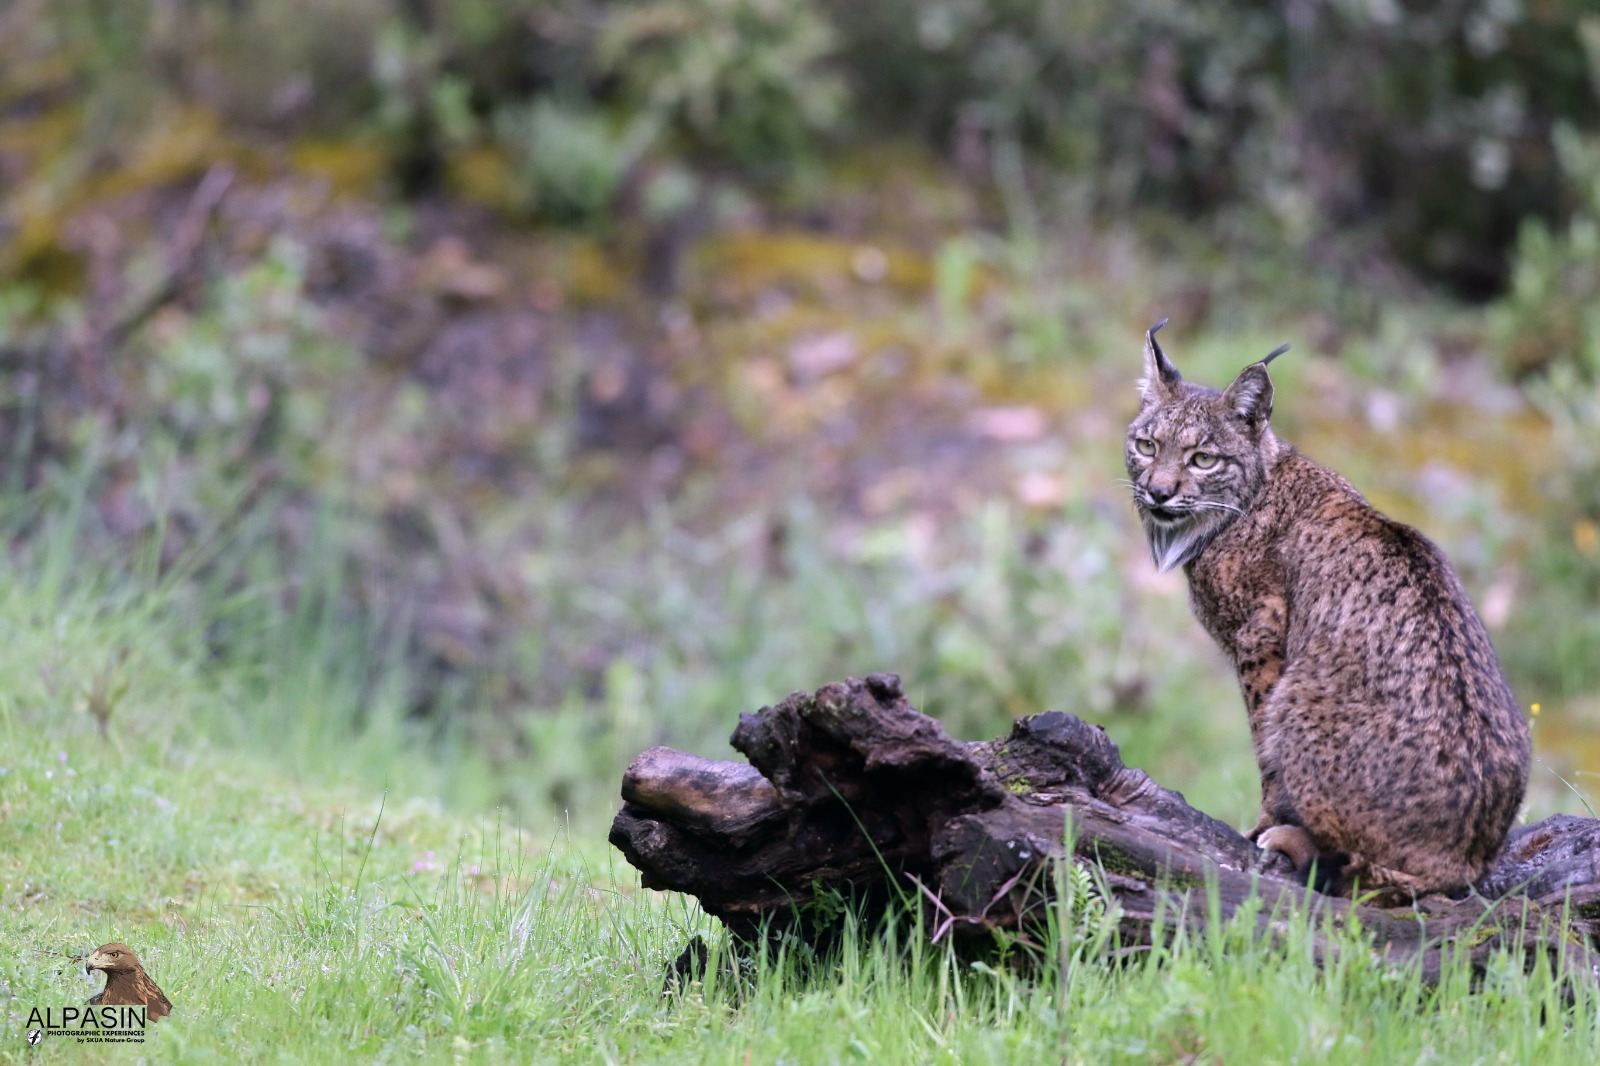 Photo experience with the Iberian lynx